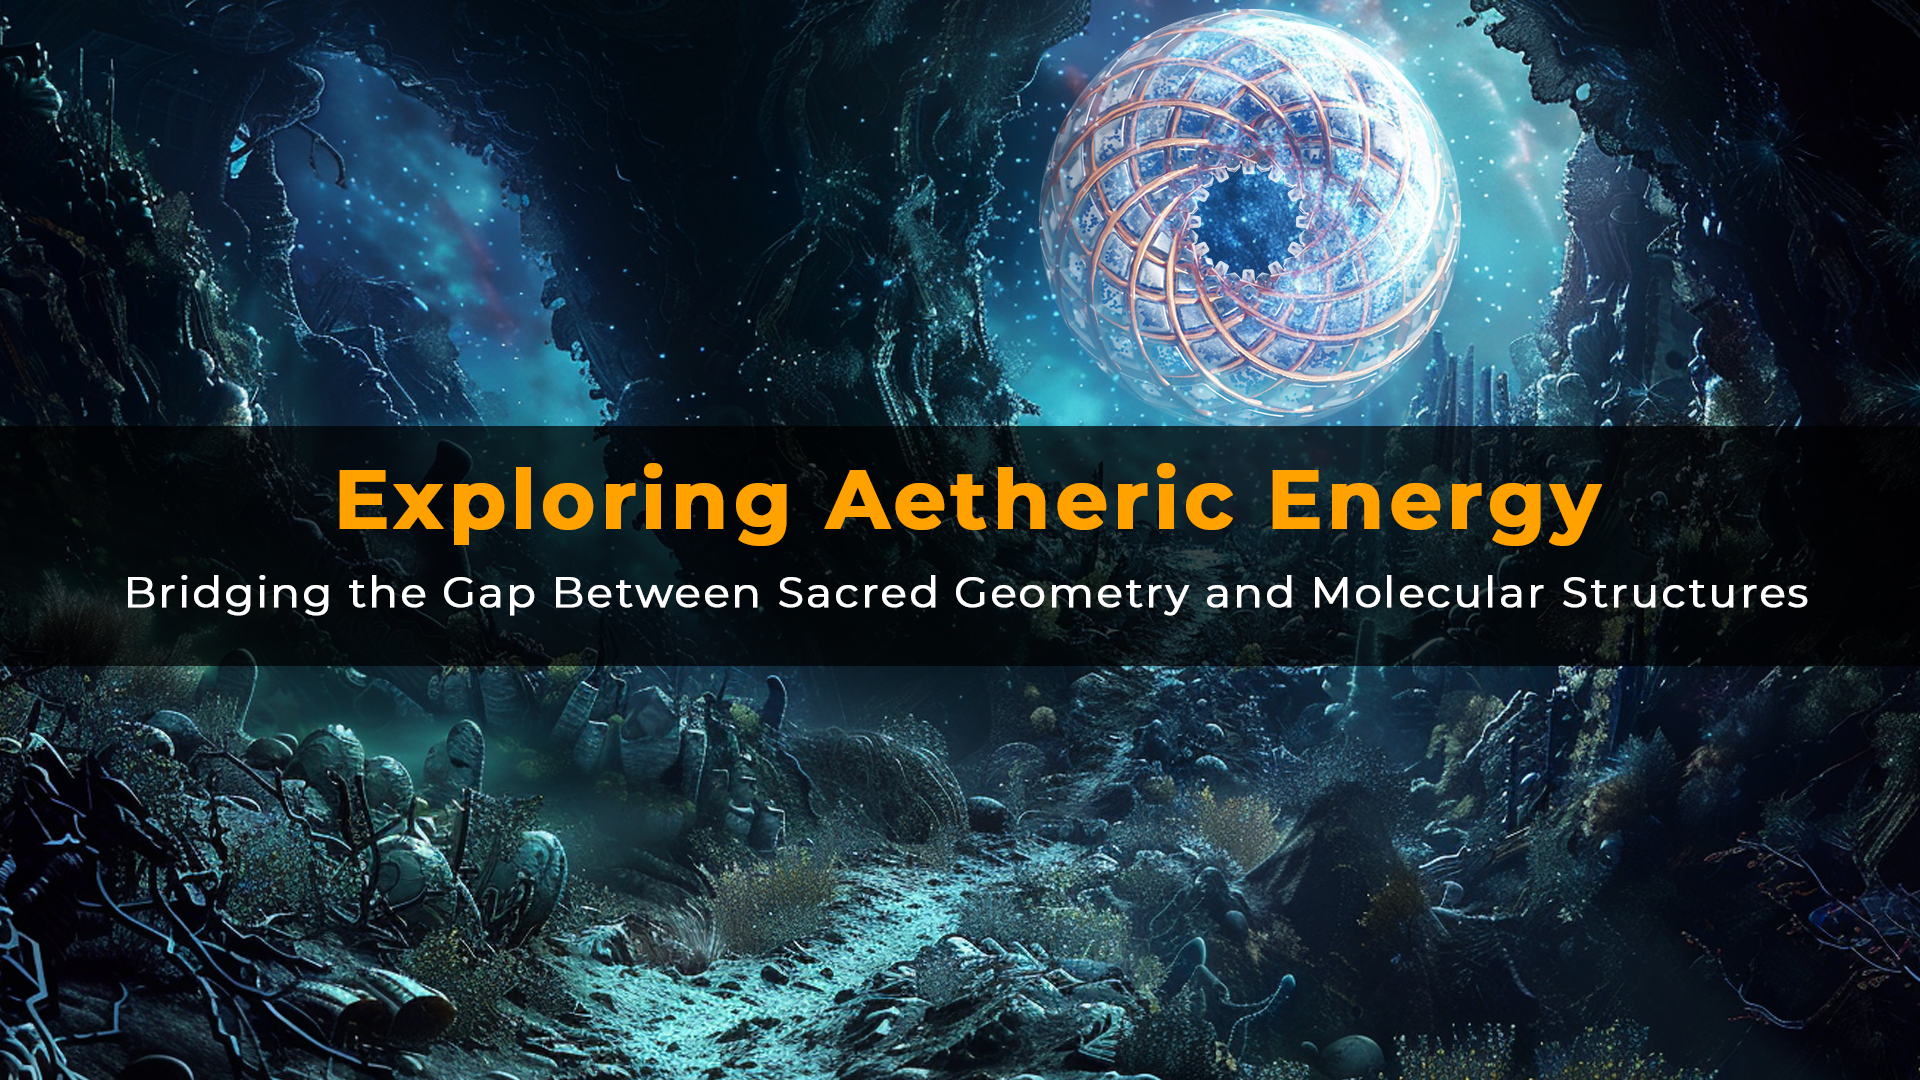 Exploring Aetheric Energy: Bridging the Gap Between Sacred Geometry and Molecular Structures